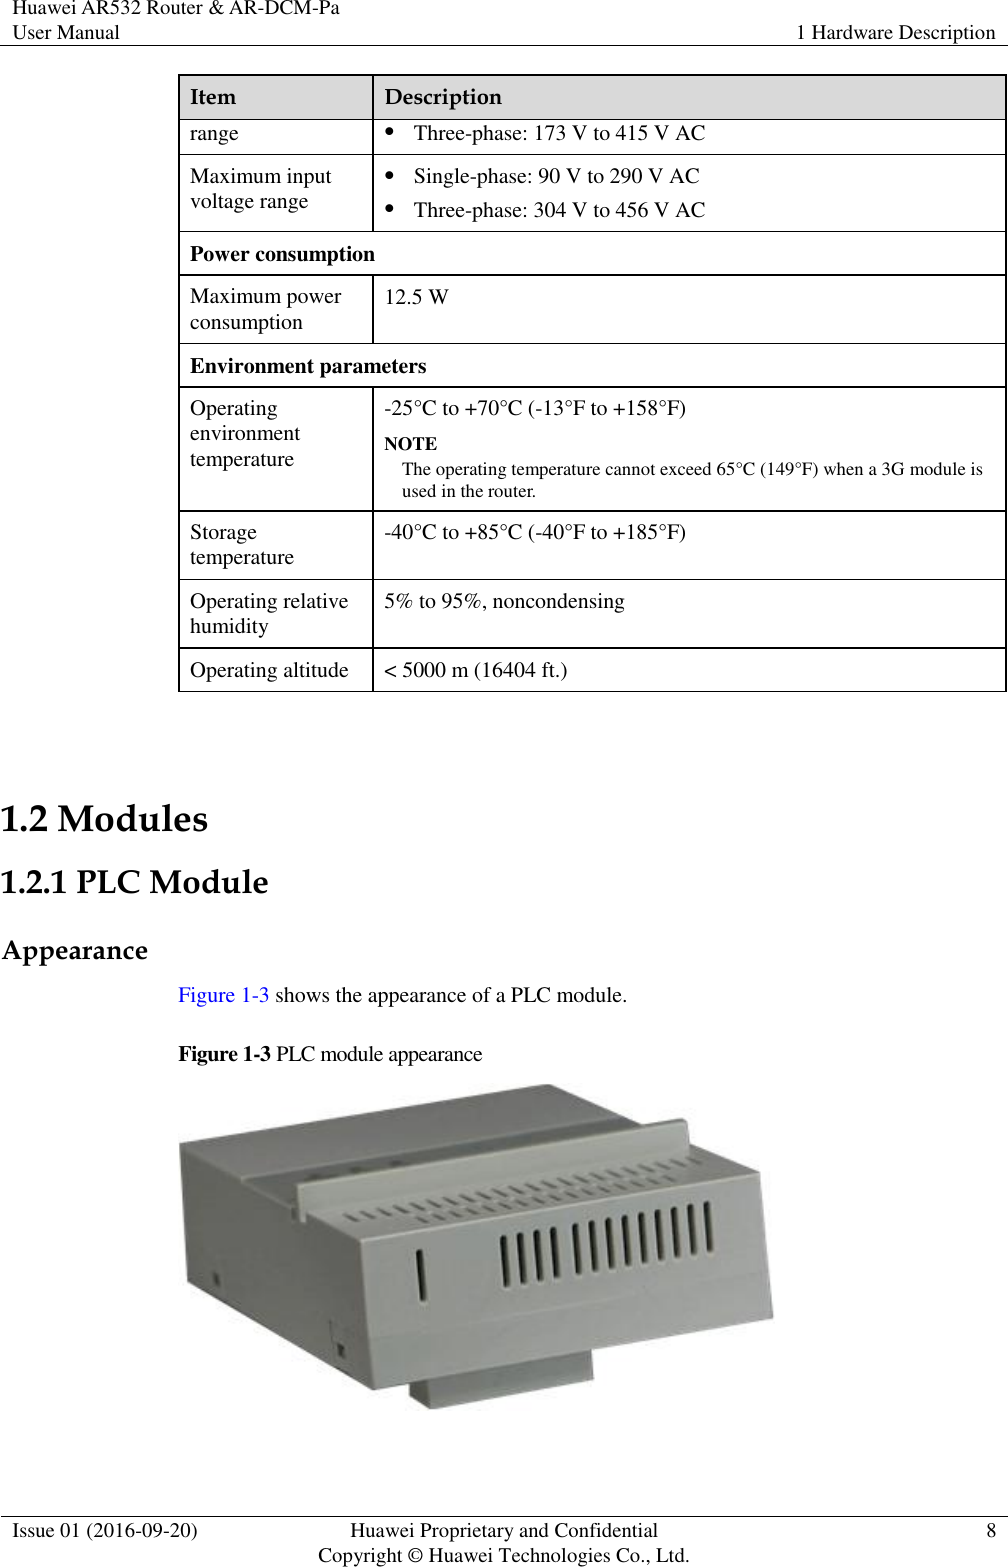 Huawei AR532 Router &amp; AR-DCM-Pa User Manual 1 Hardware Description  Issue 01 (2016-09-20) Huawei Proprietary and Confidential                                     Copyright © Huawei Technologies Co., Ltd. 8  Item Description range  Three-phase: 173 V to 415 V AC Maximum input voltage range  Single-phase: 90 V to 290 V AC  Three-phase: 304 V to 456 V AC Power consumption Maximum power consumption 12.5 W Environment parameters Operating environment temperature -25°C to +70°C (-13°F to +158°F) NOTE The operating temperature cannot exceed 65°C (149°F) when a 3G module is used in the router. Storage temperature -40°C to +85°C (-40°F to +185°F) Operating relative humidity 5% to 95%, noncondensing Operating altitude &lt; 5000 m (16404 ft.)  1.2 Modules 1.2.1 PLC Module Appearance Figure 1-3 shows the appearance of a PLC module. Figure 1-3 PLC module appearance   